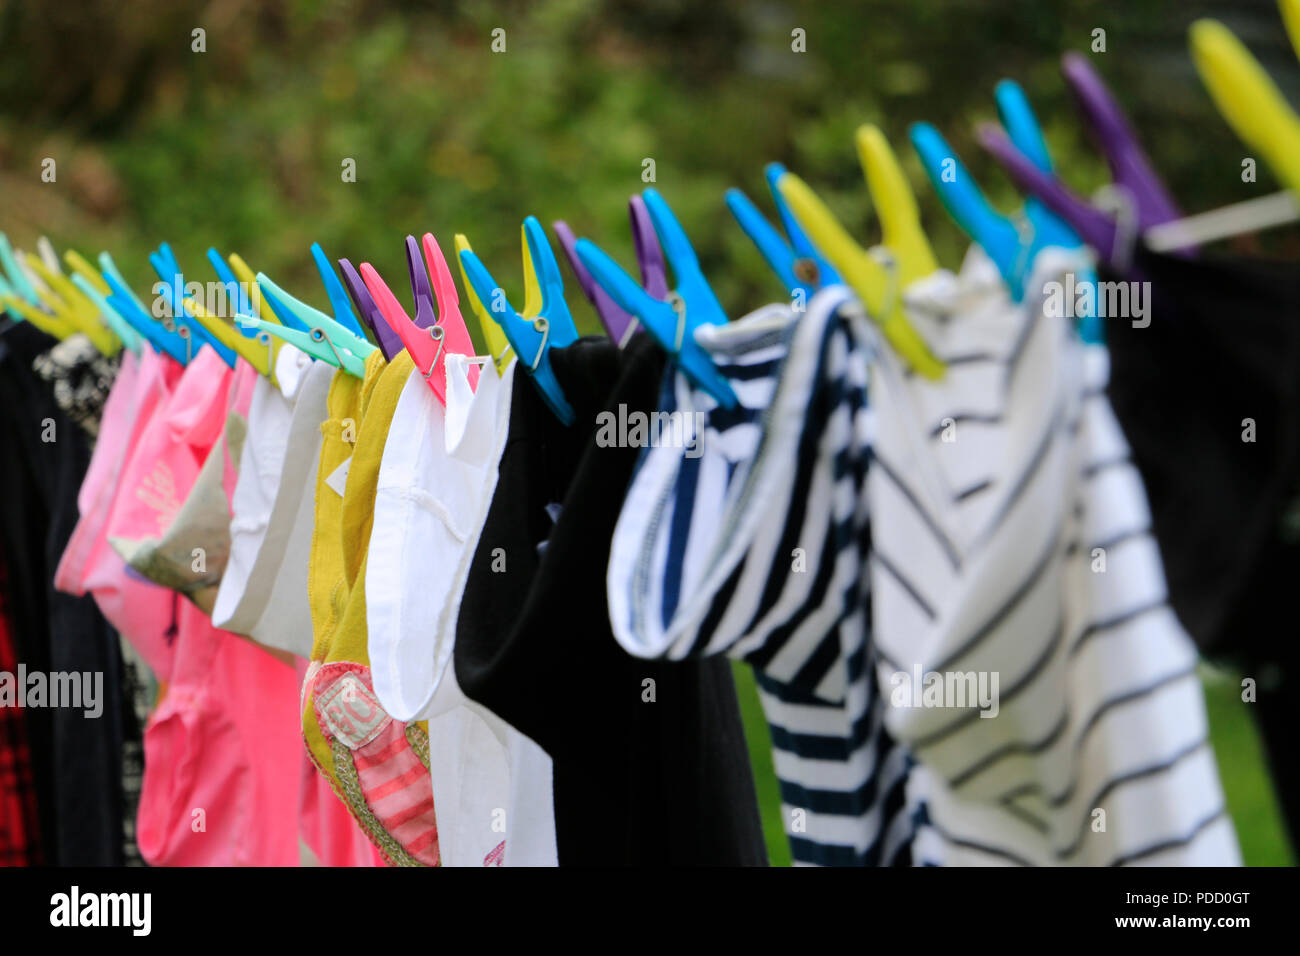 Clothes drying, laundry on washing line with multicoloured clothes pegs ...